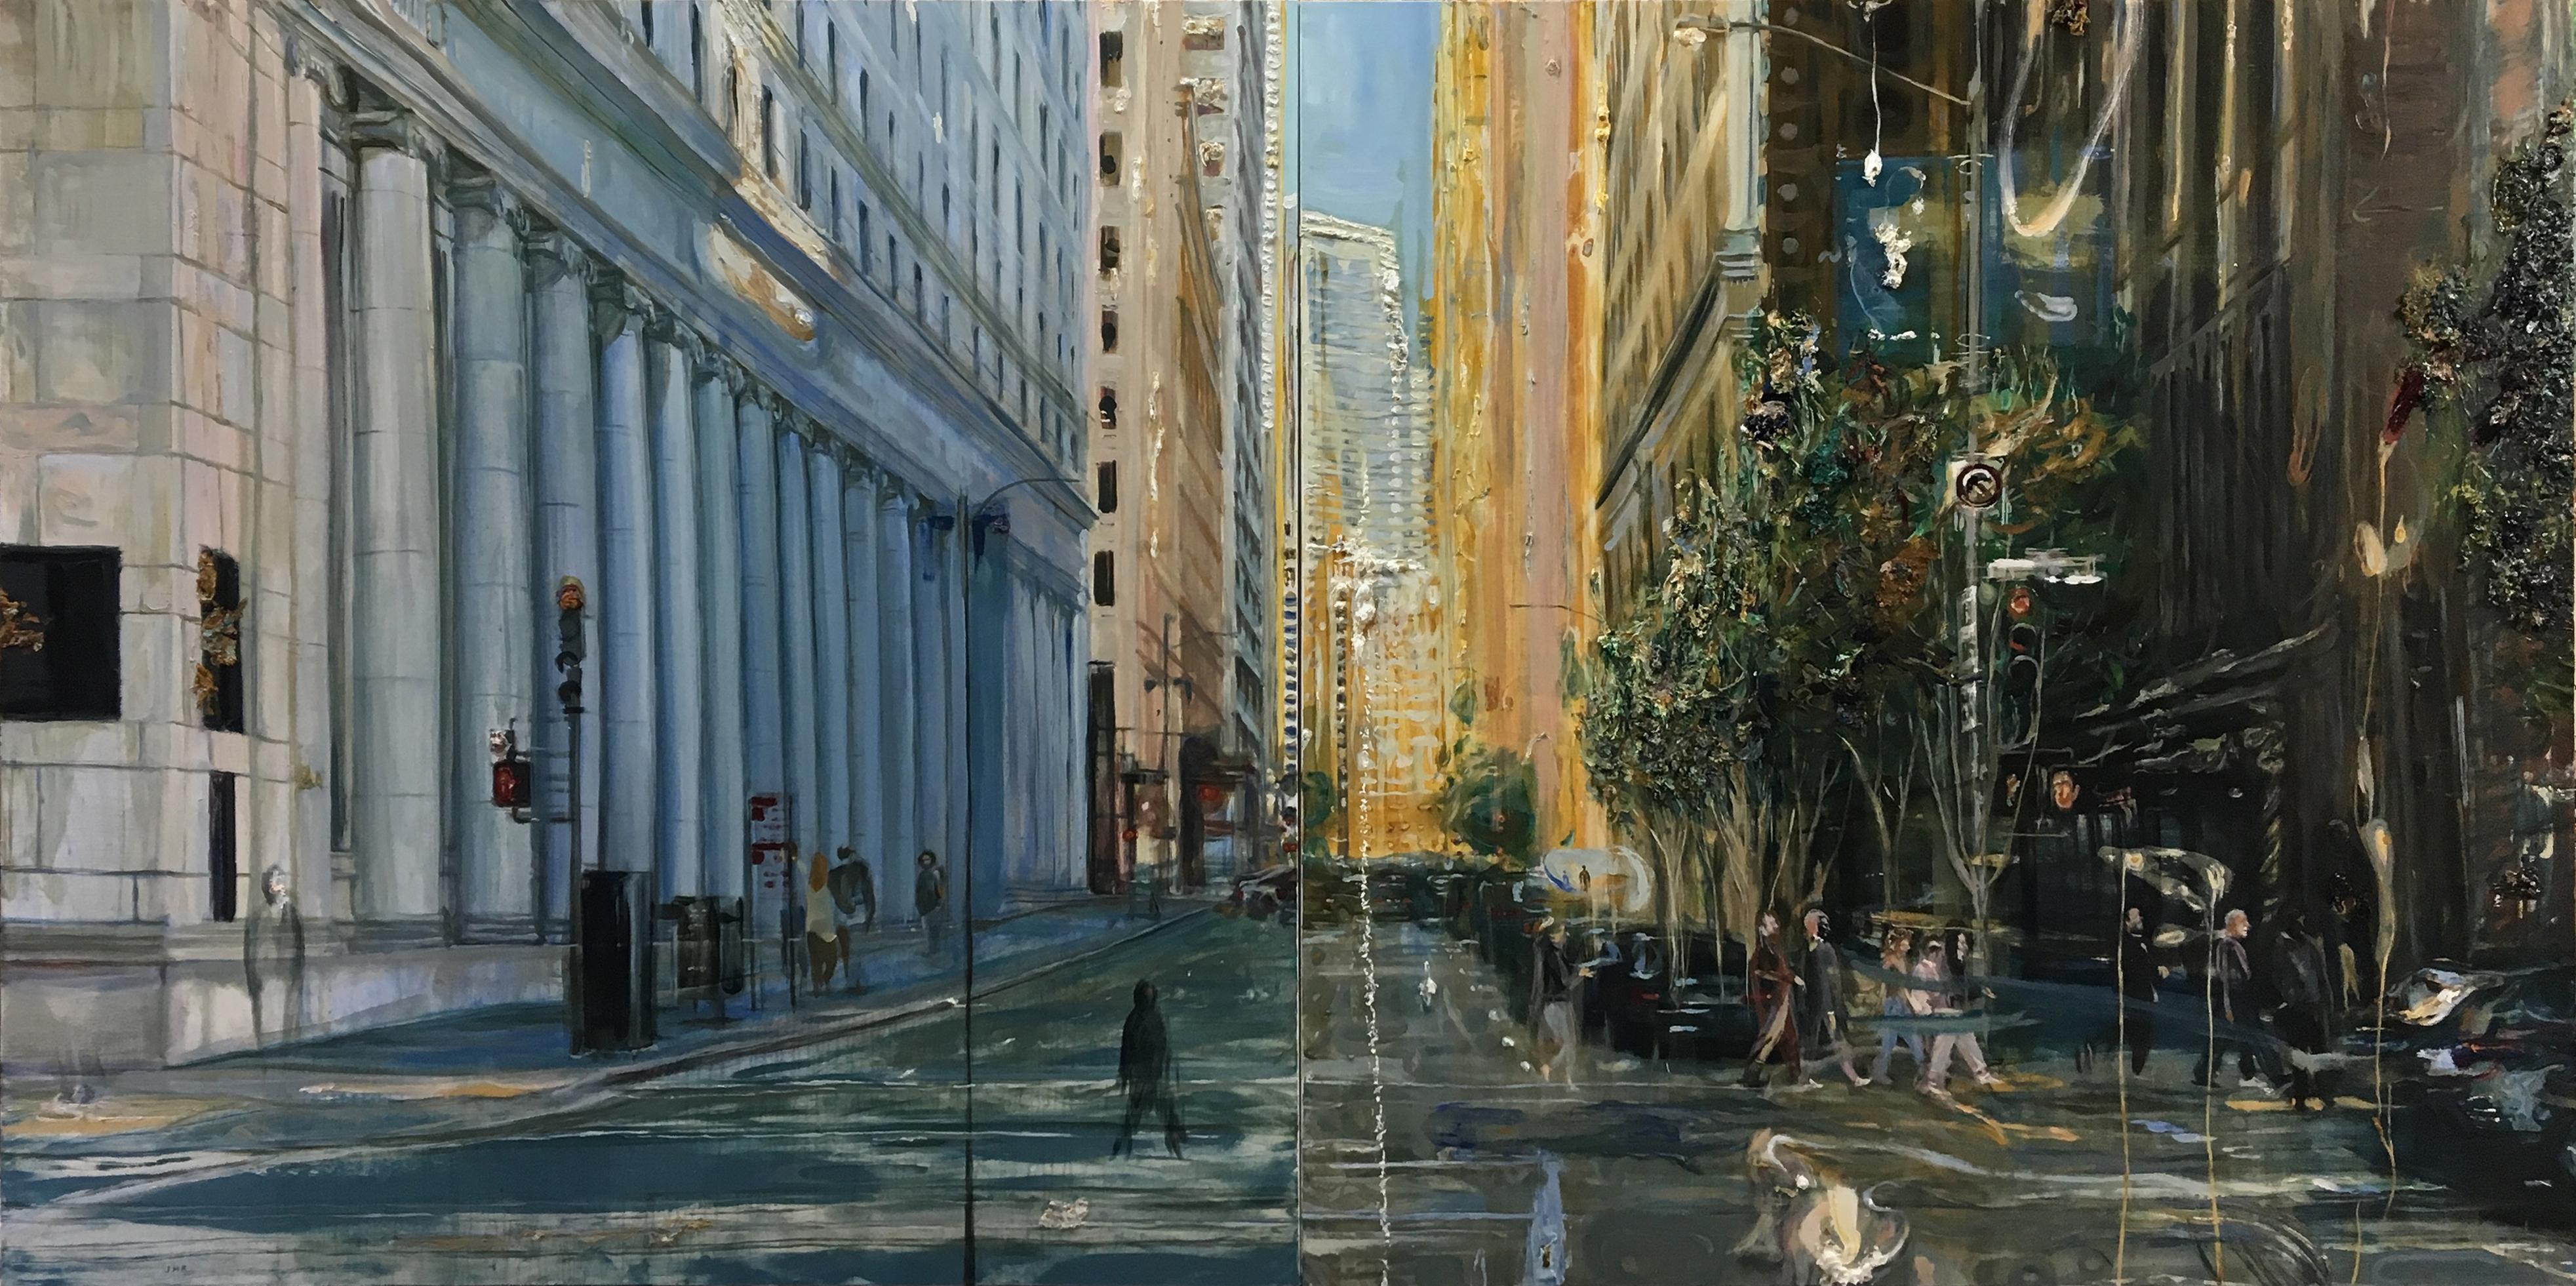 Jung Han Kim Landscape Painting – Montgomery St., Mid Century San Francisco cityscape in thick impasto oil